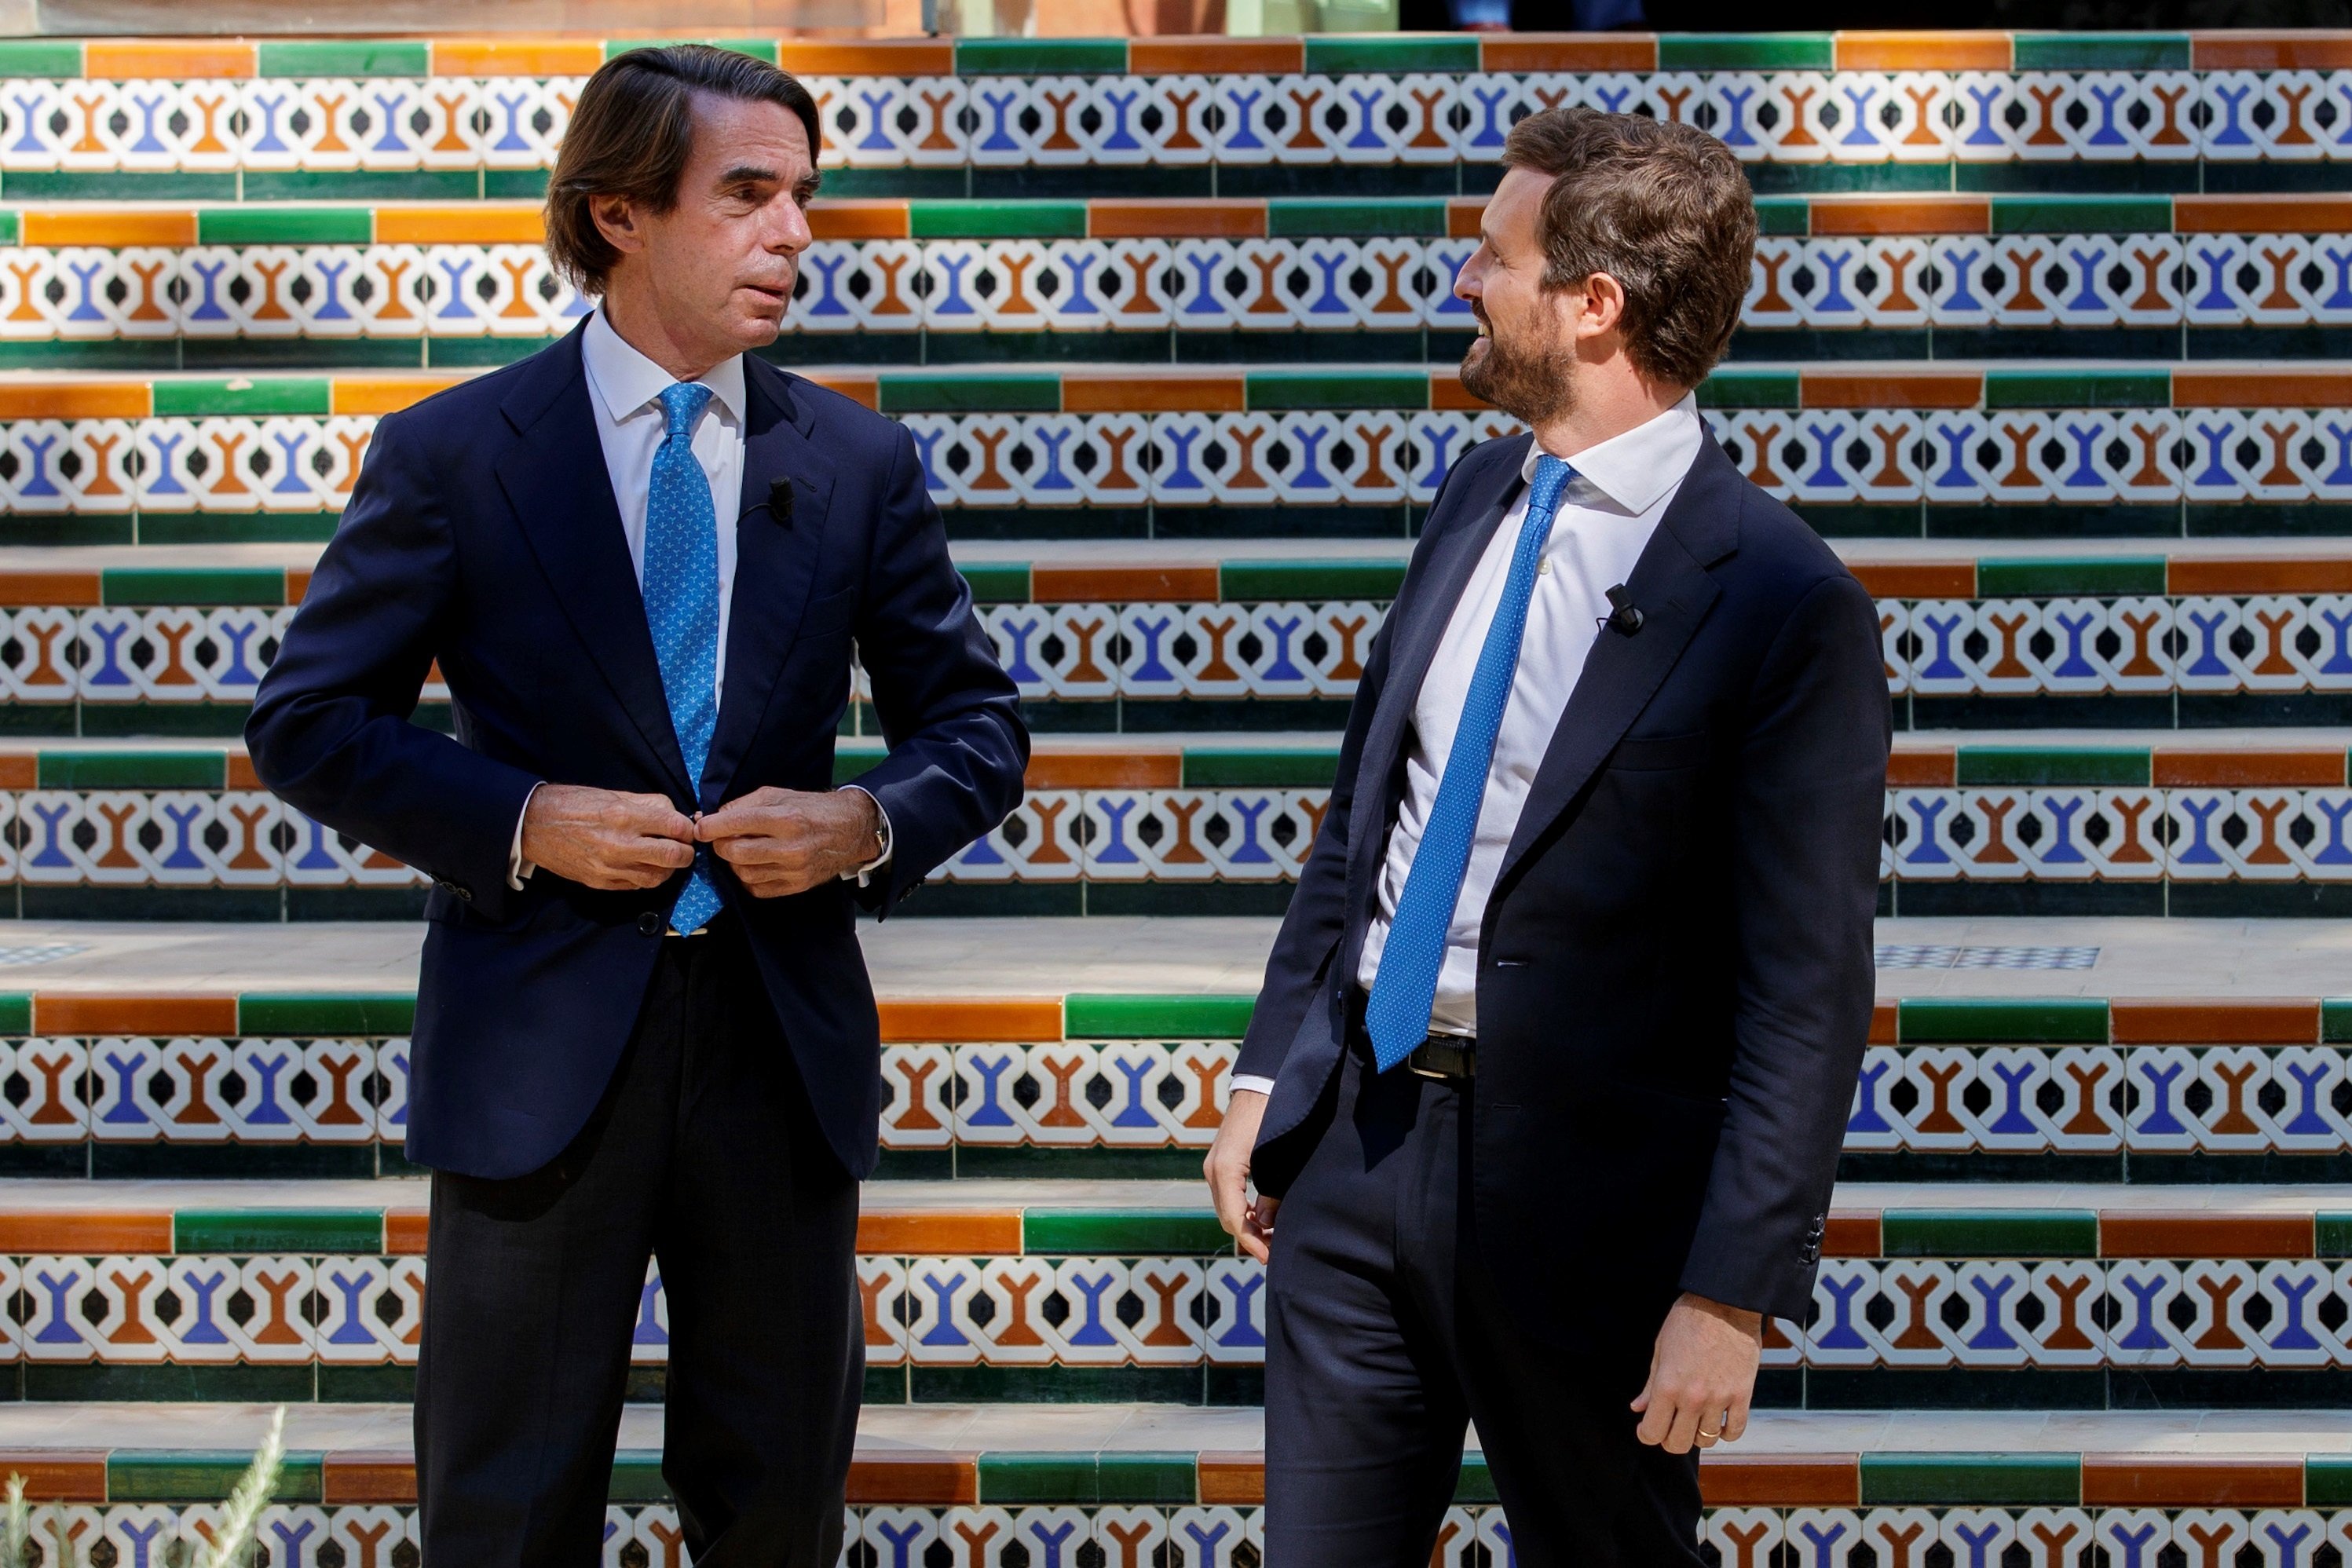 Aznar: "Spain is one nation, not a pluri-national state or anything of the sort"